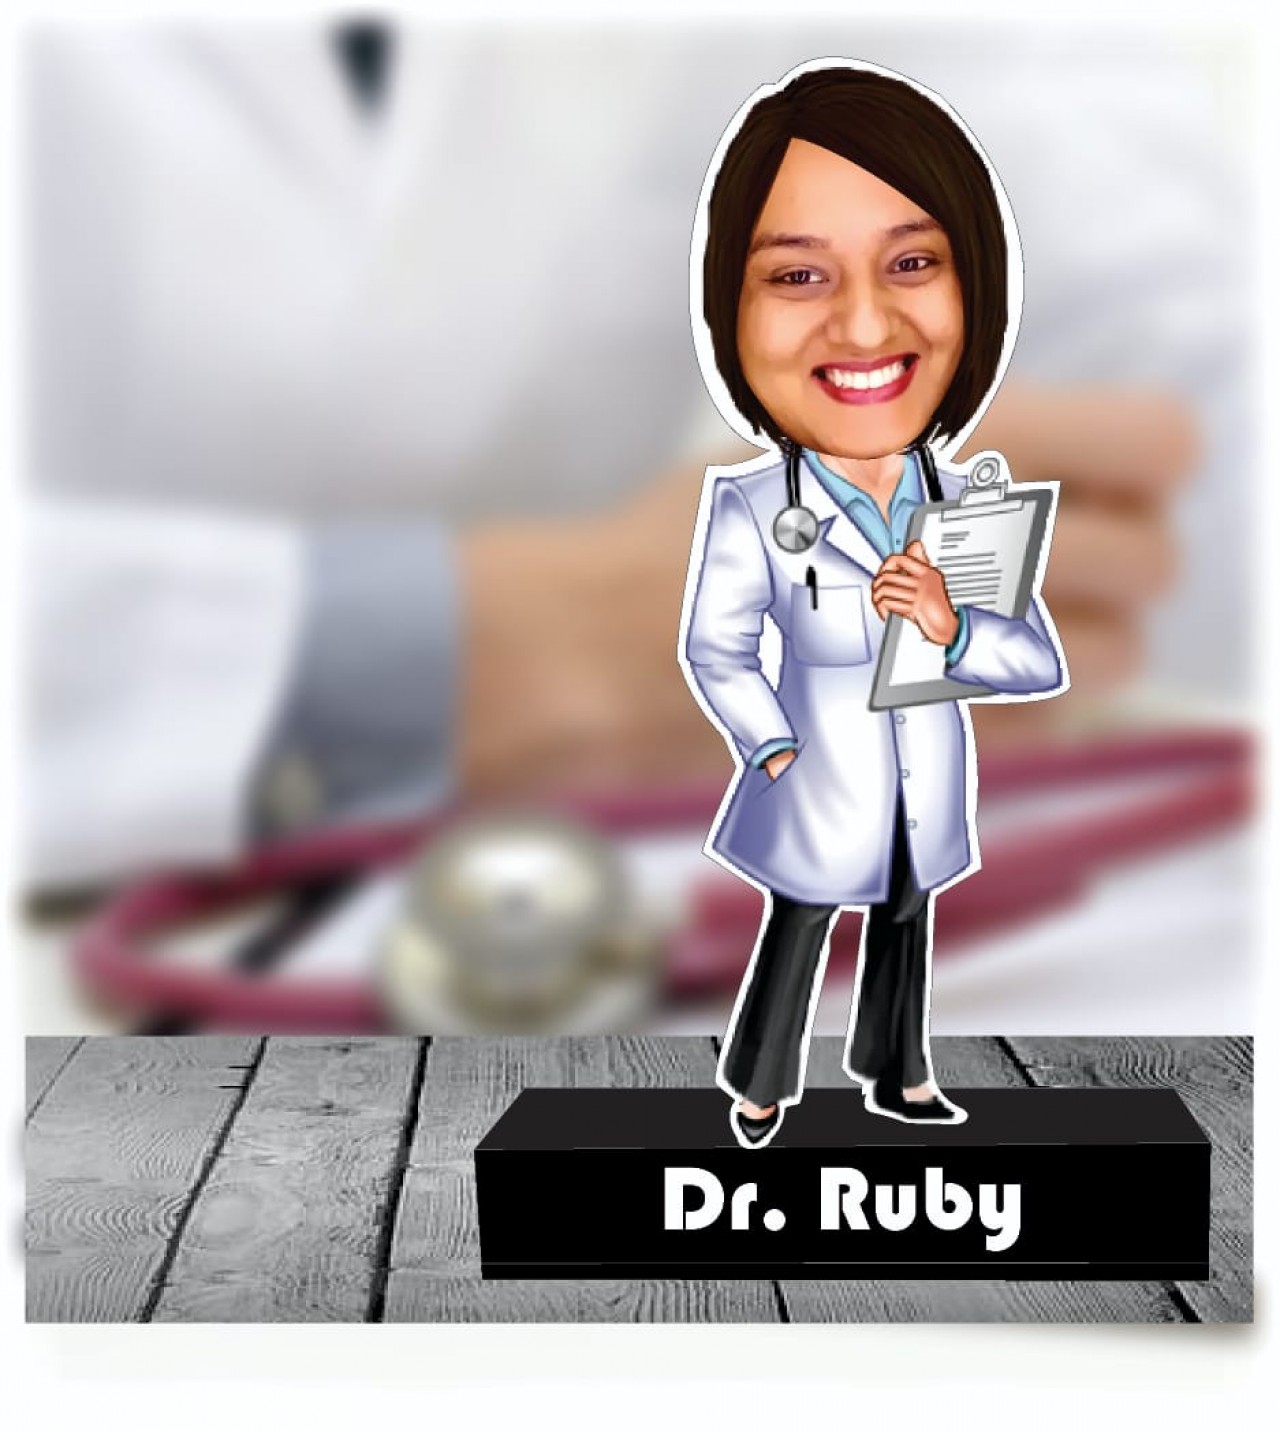 Personalized Doctor Caricature For Female